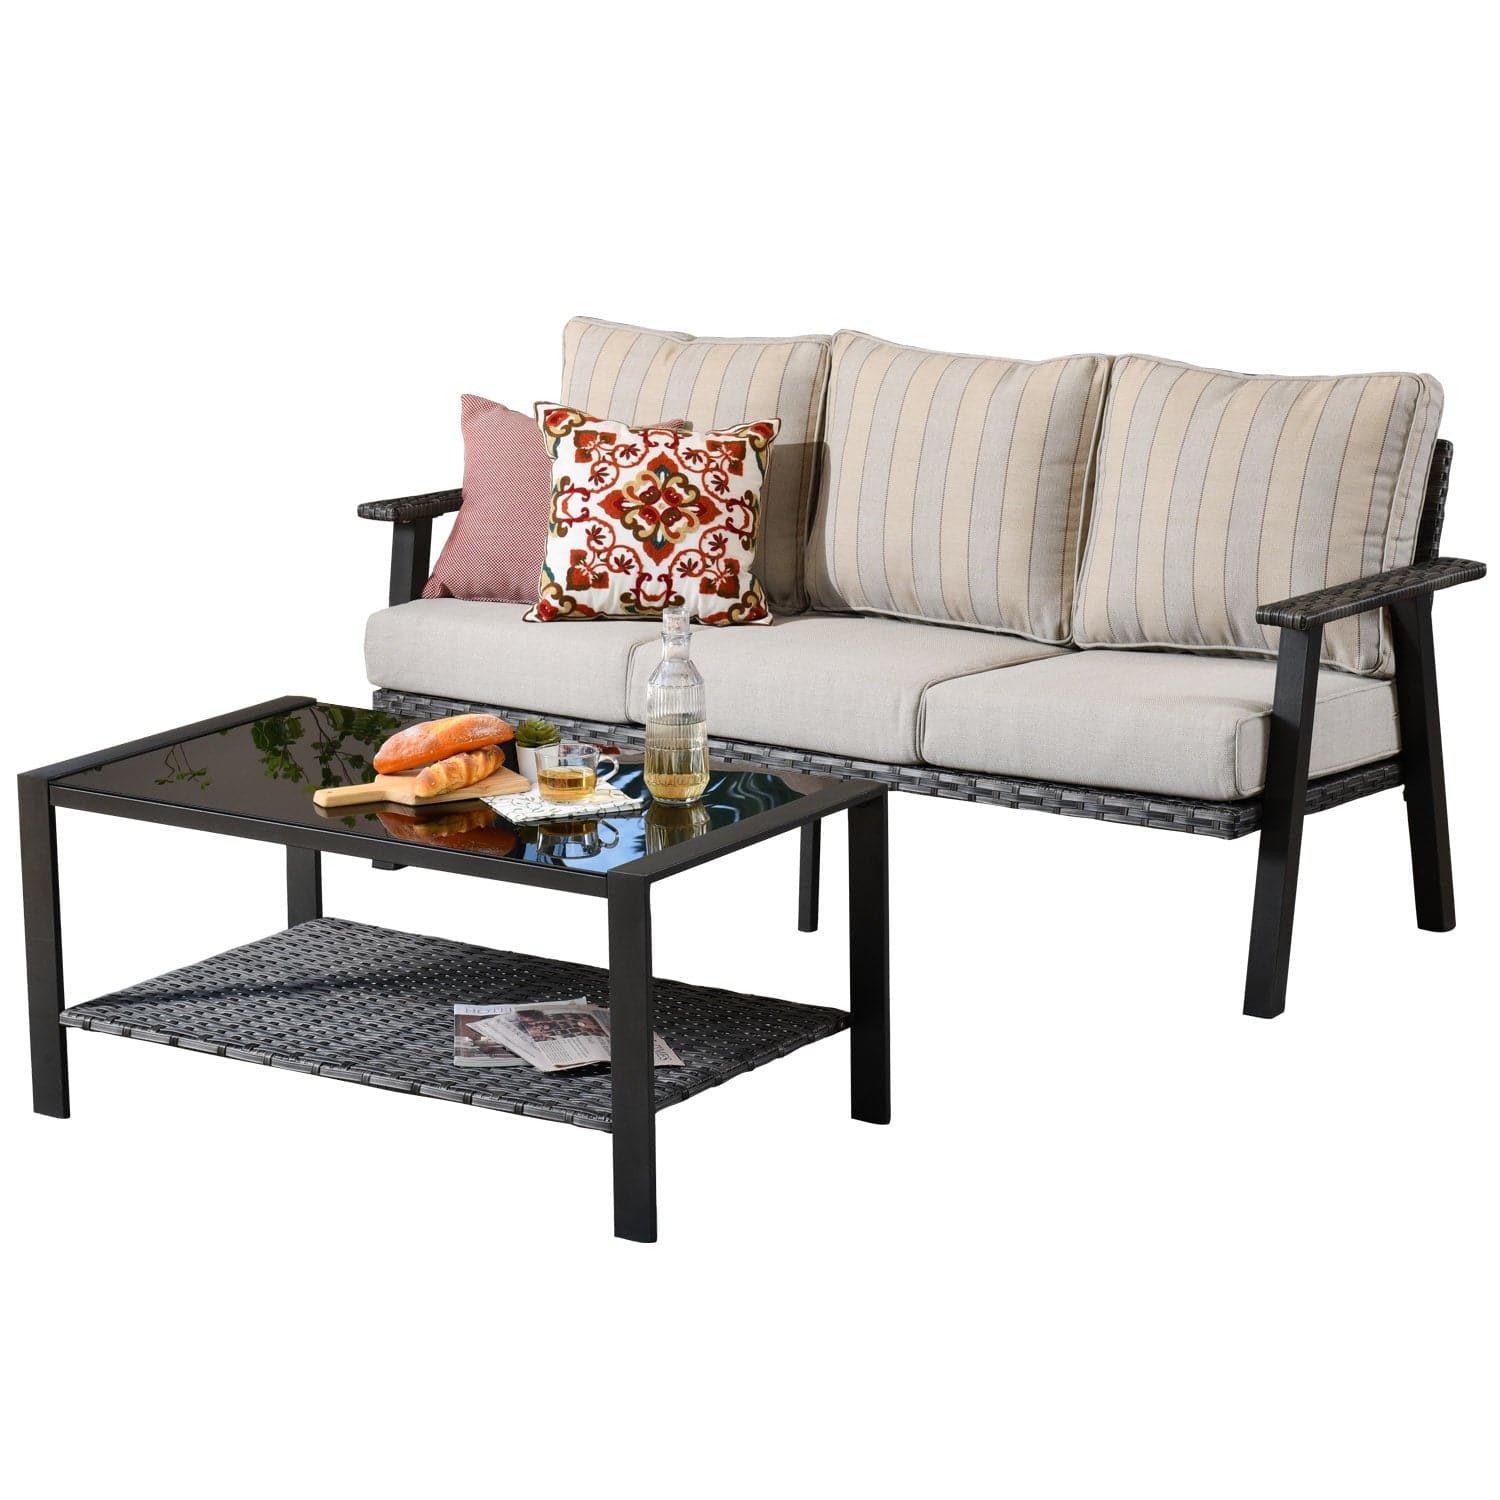 Ovios Outdoor Bistro Set with 5'' Cushion Couch and Table, Olefin Fabric